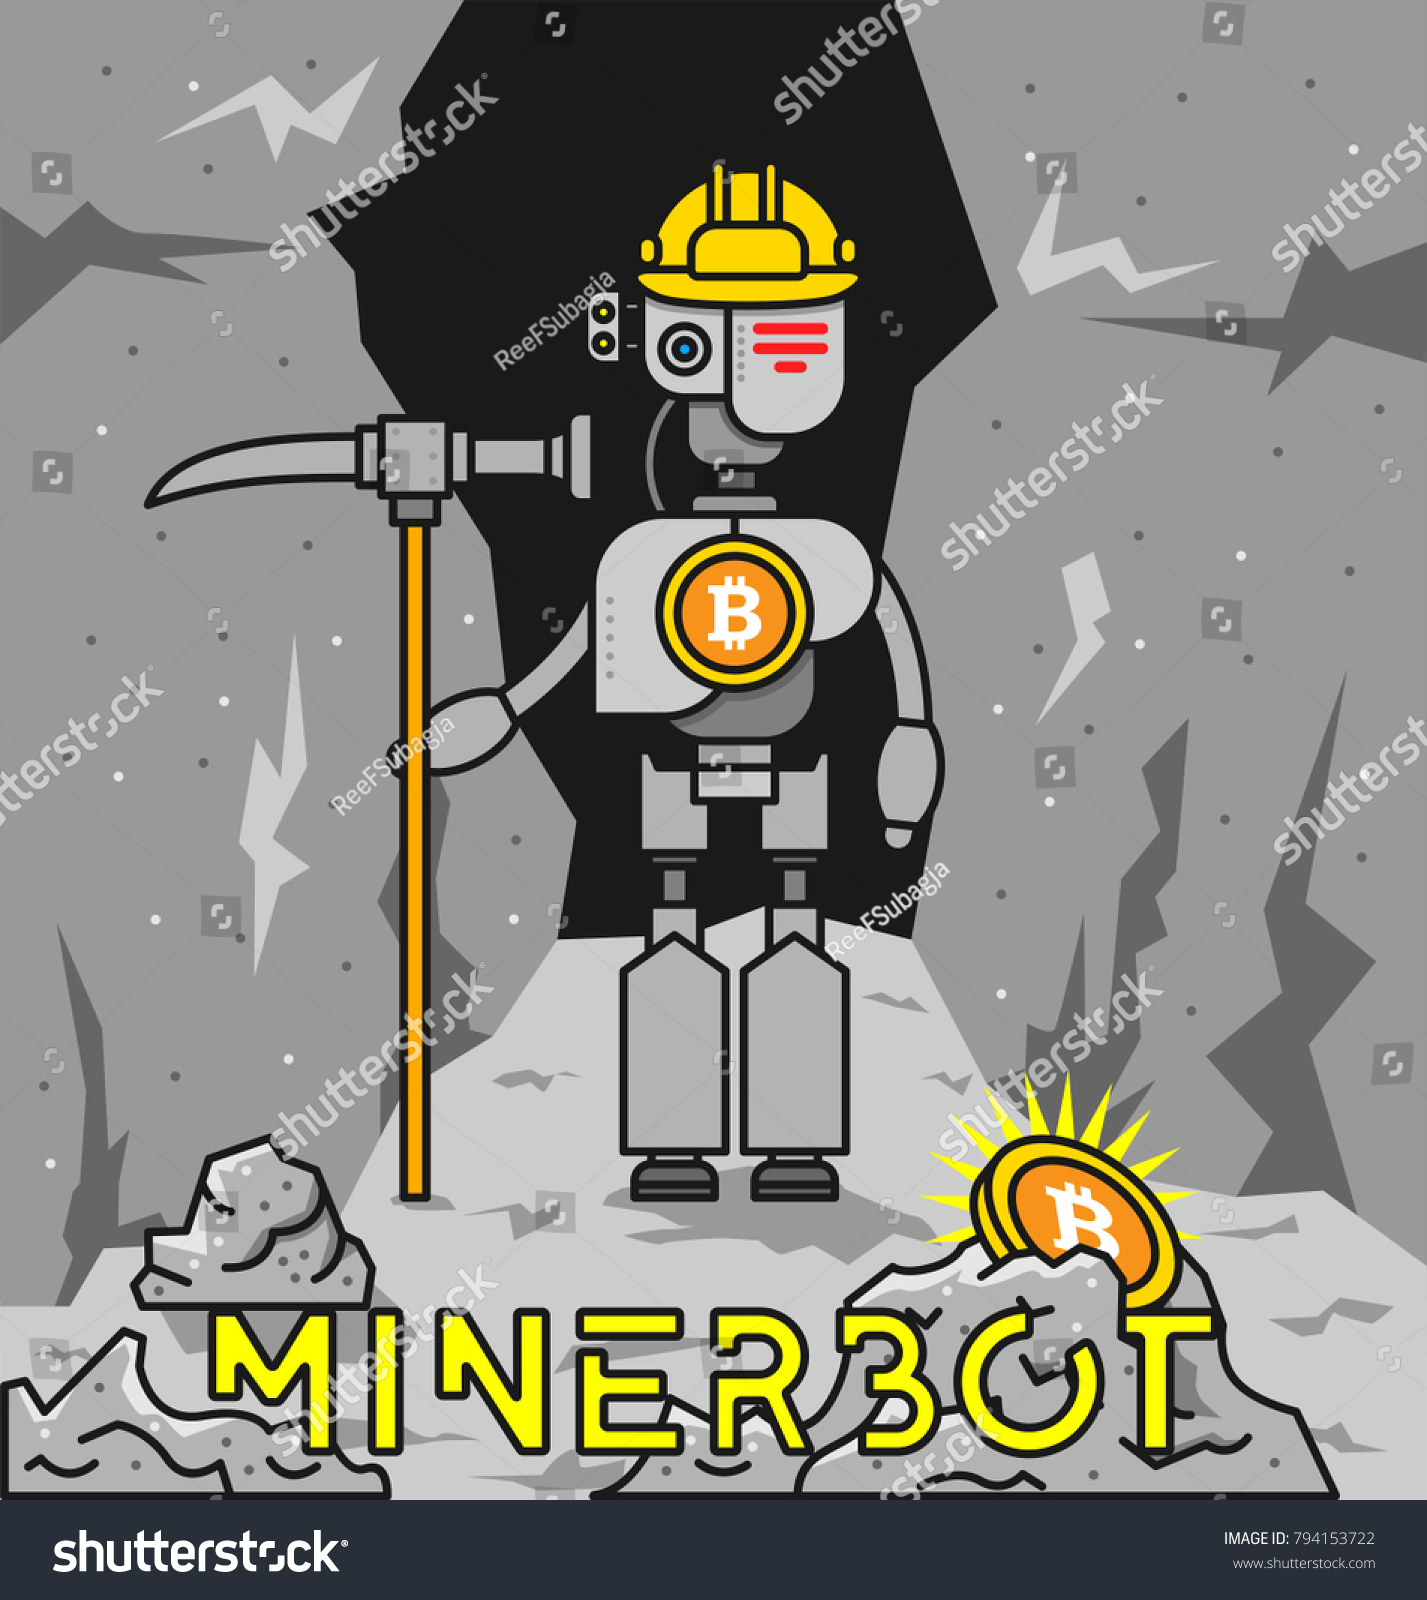 Is a robot bitcoin miner preferable?